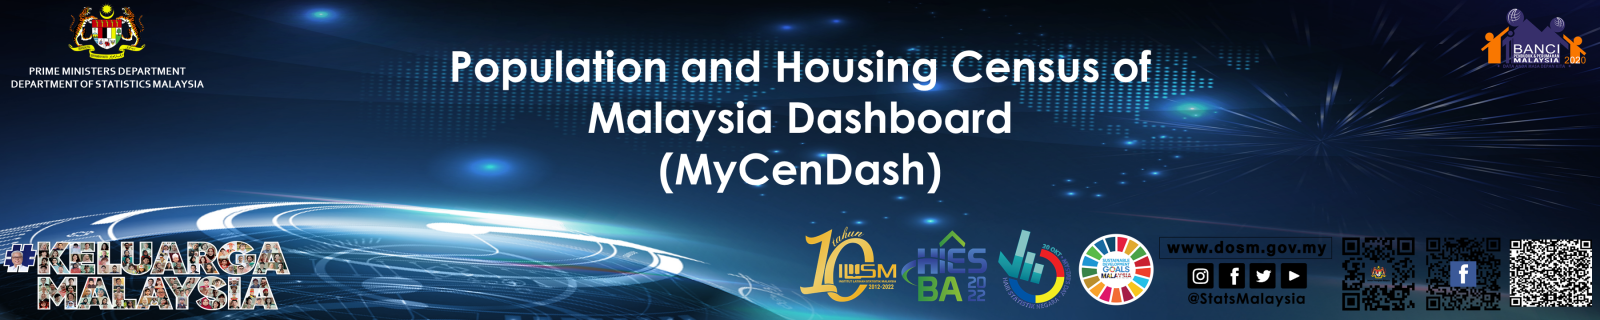 Population and Housing Census of Malaysia Dashboard (MyCenDash) 